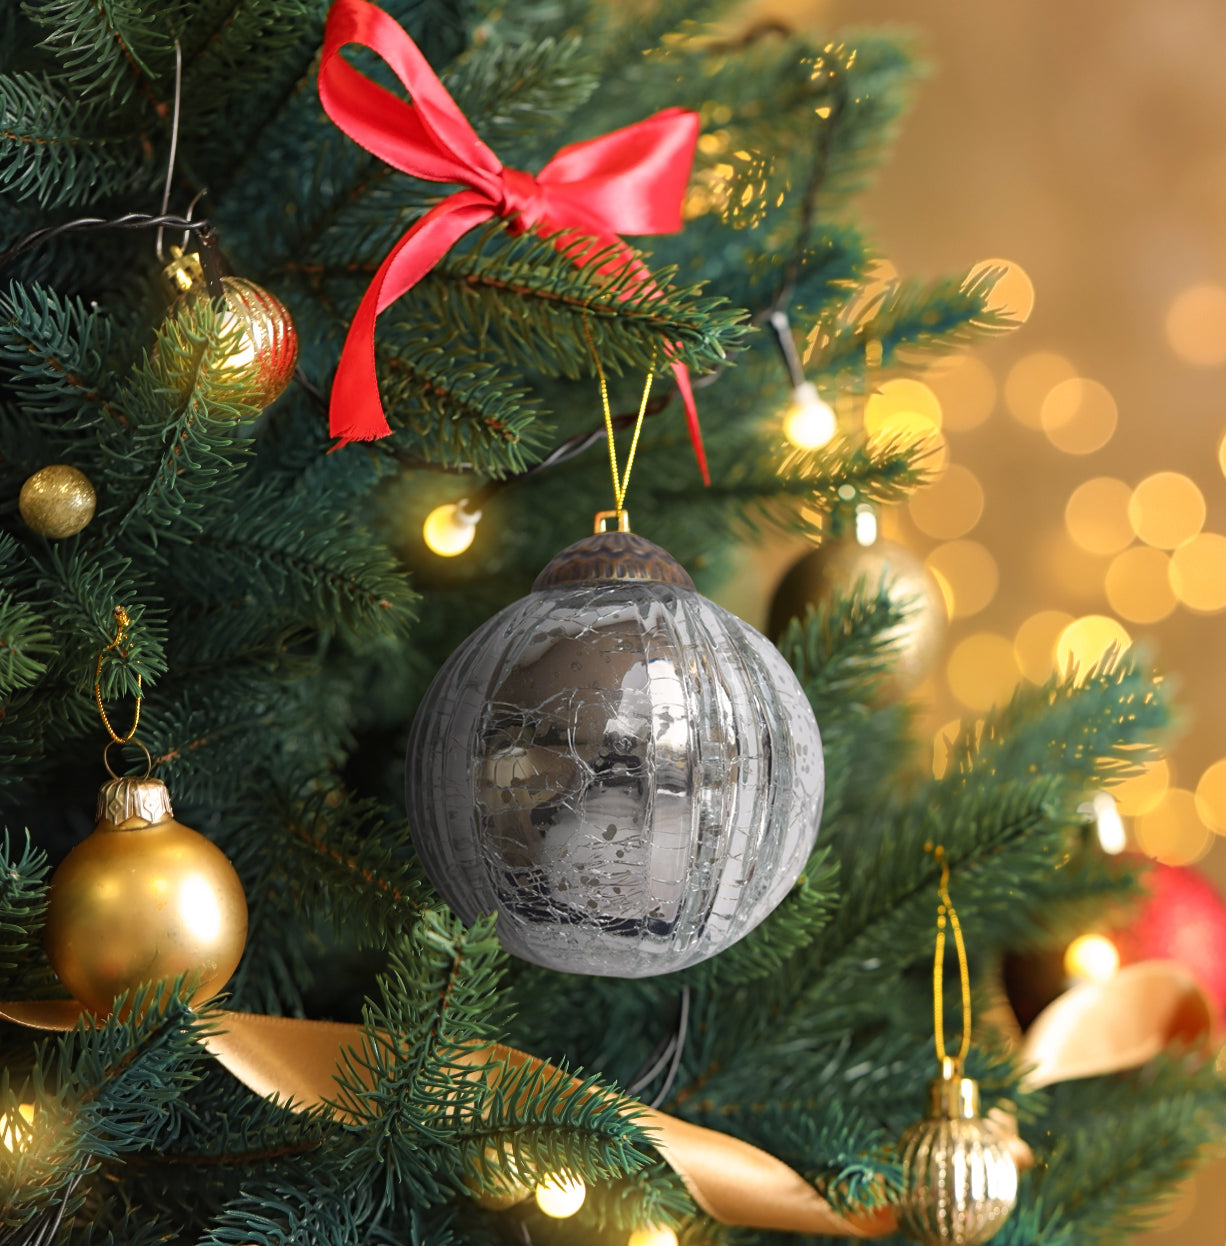 Set of 4 Silver Mercury Glass Ornaments (3.15 Inch Grooved Crackle Ball) - Perfect for Christmas Tree, Hanging Holiday Decoration, Gifts & Home Decor - WillBrite.com - Gifts & Décor that Make People Happy